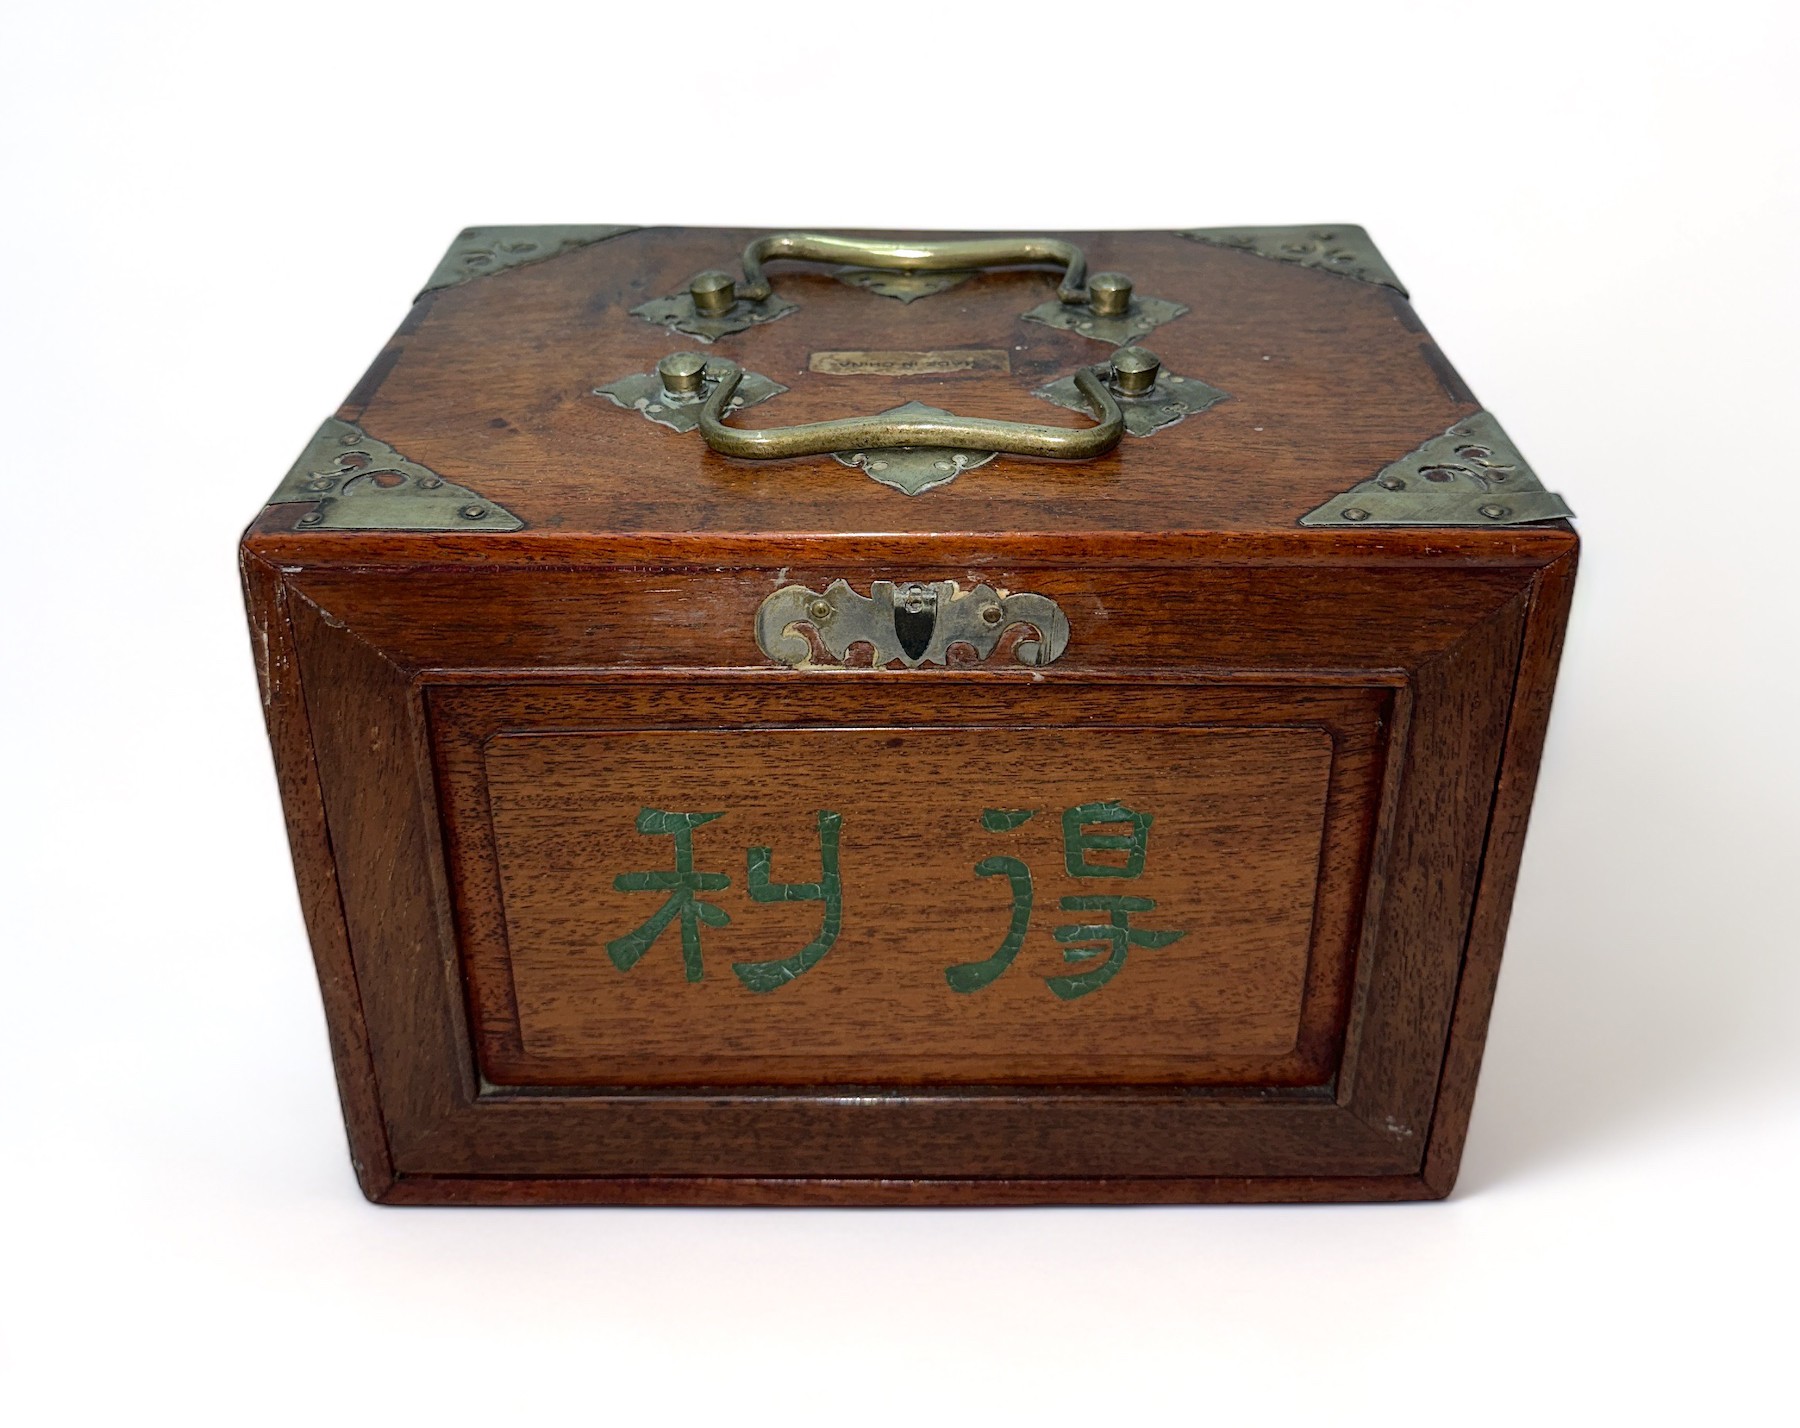 Chinese 20th Century Mahjong set, contained in a wooden export case with handle and five drawers